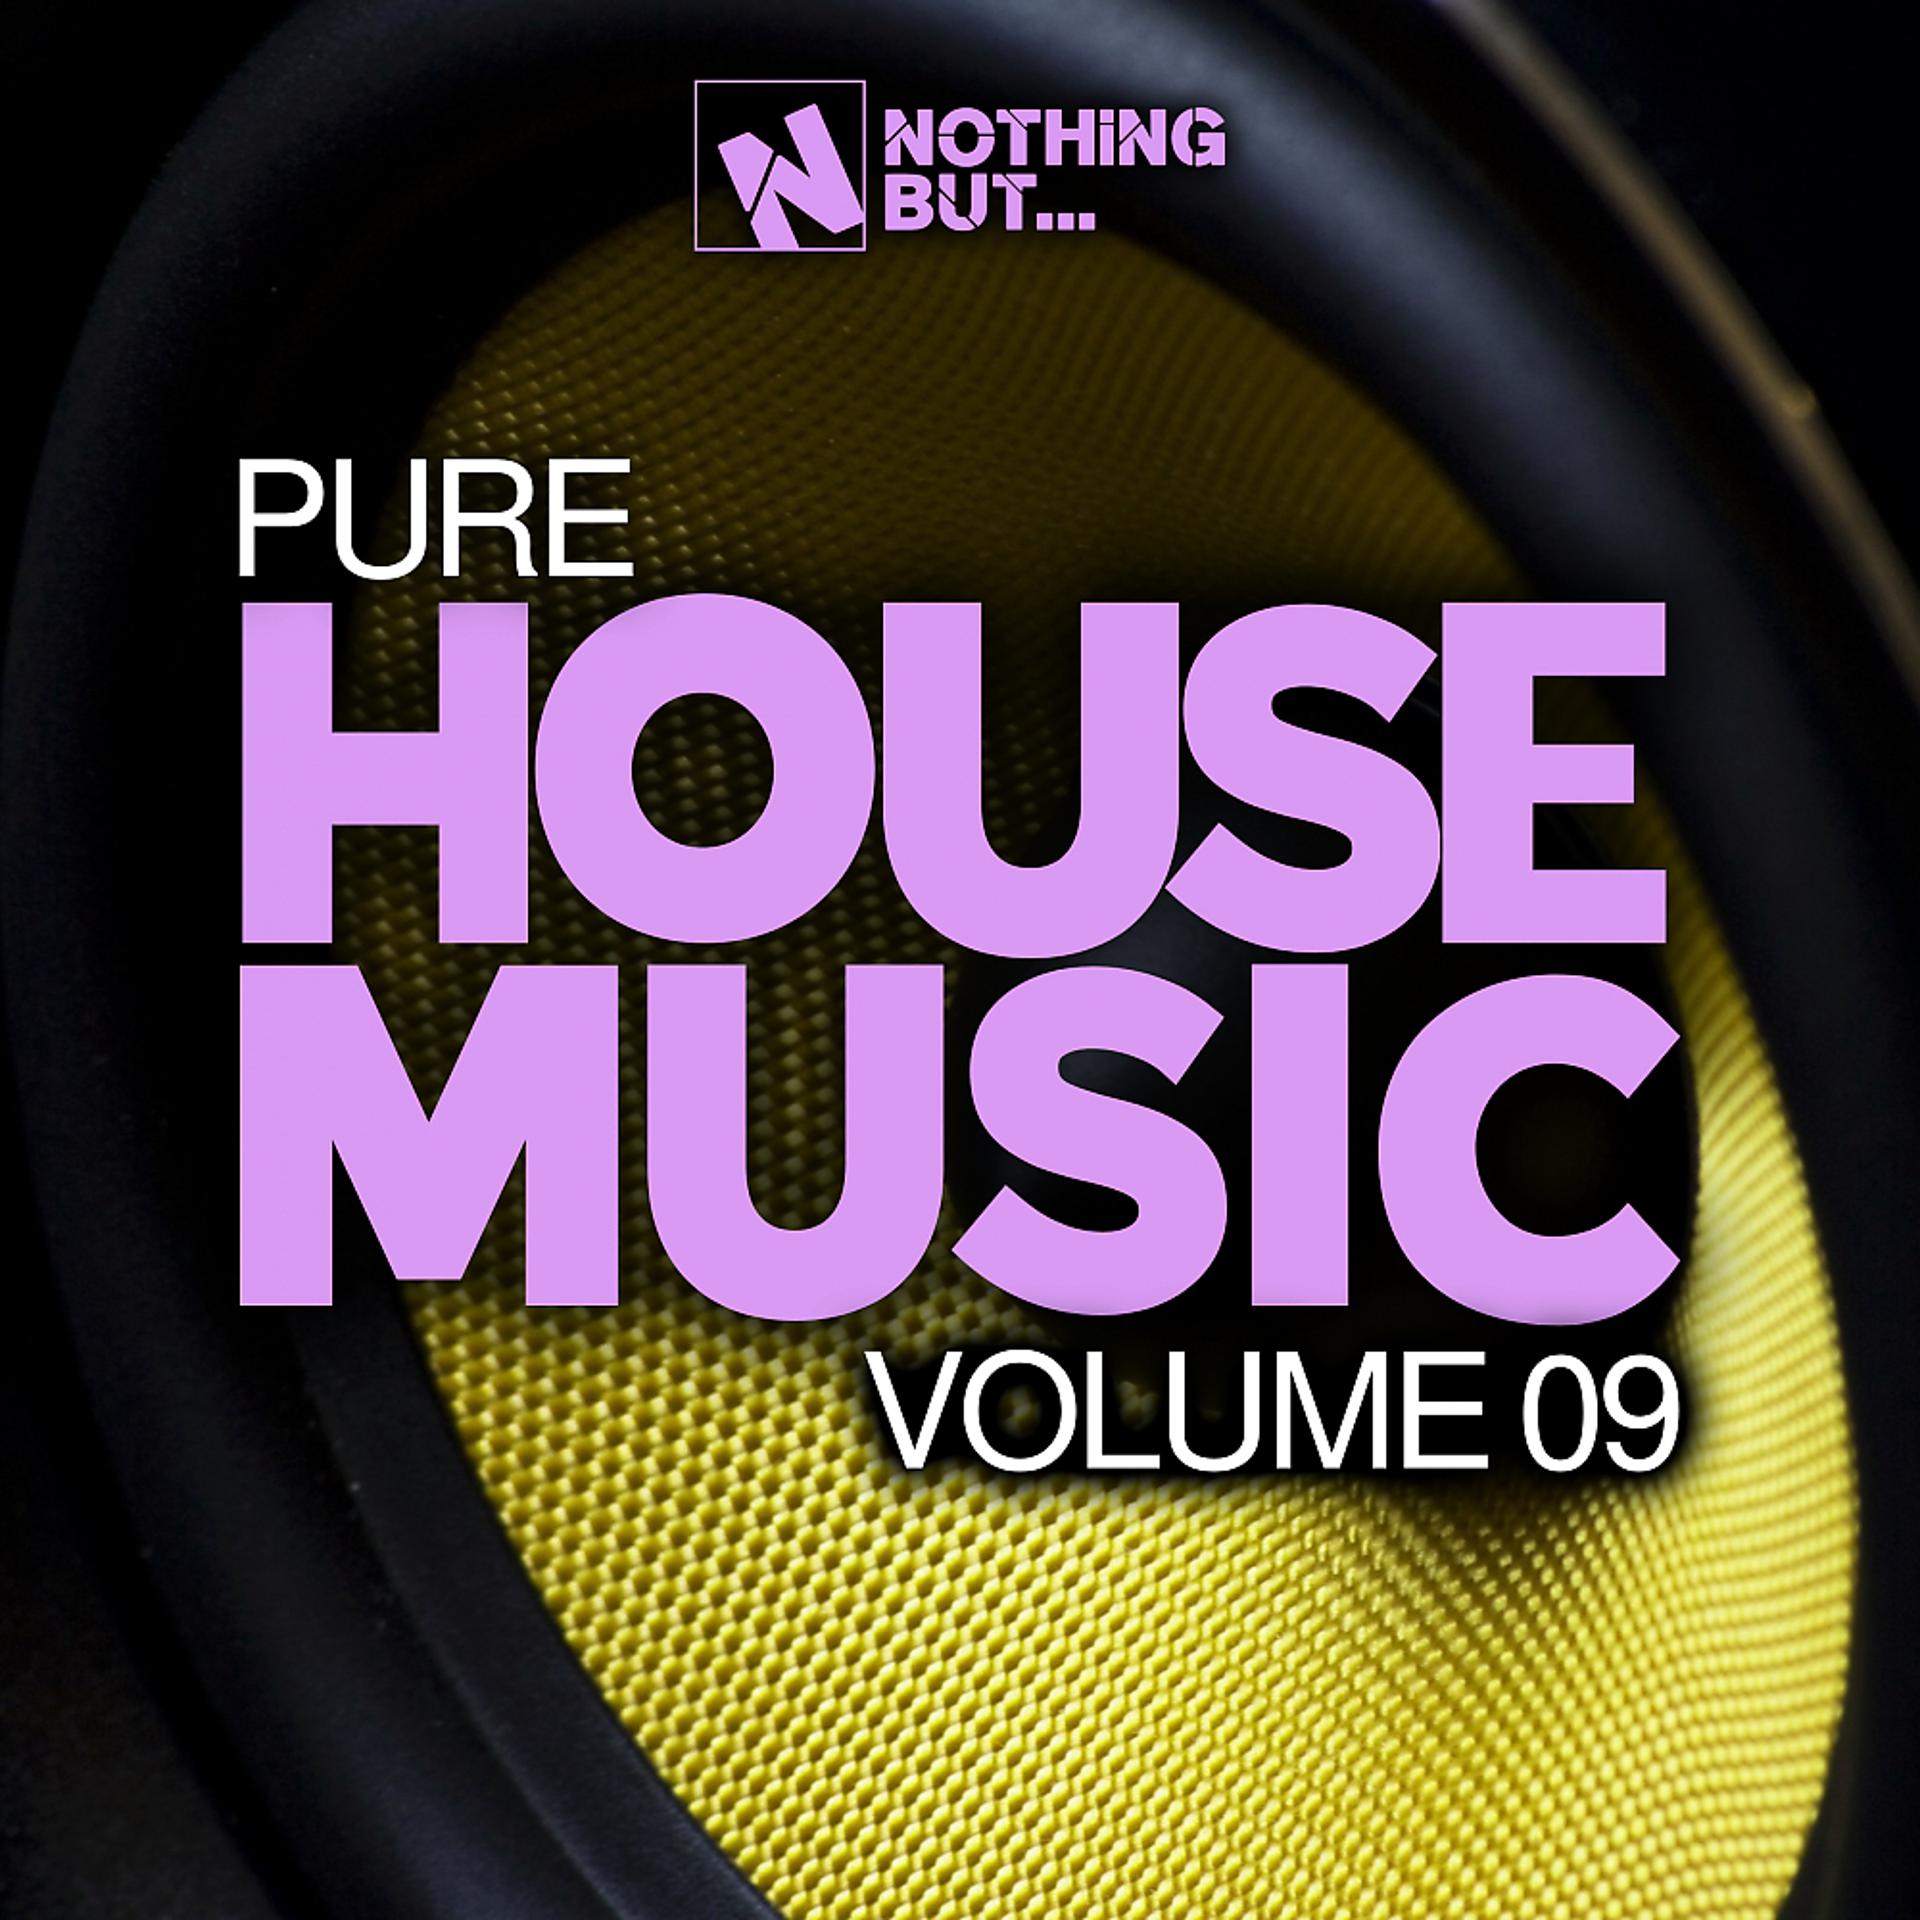 Постер альбома Nothing But... Pure House Music, Vol. 09